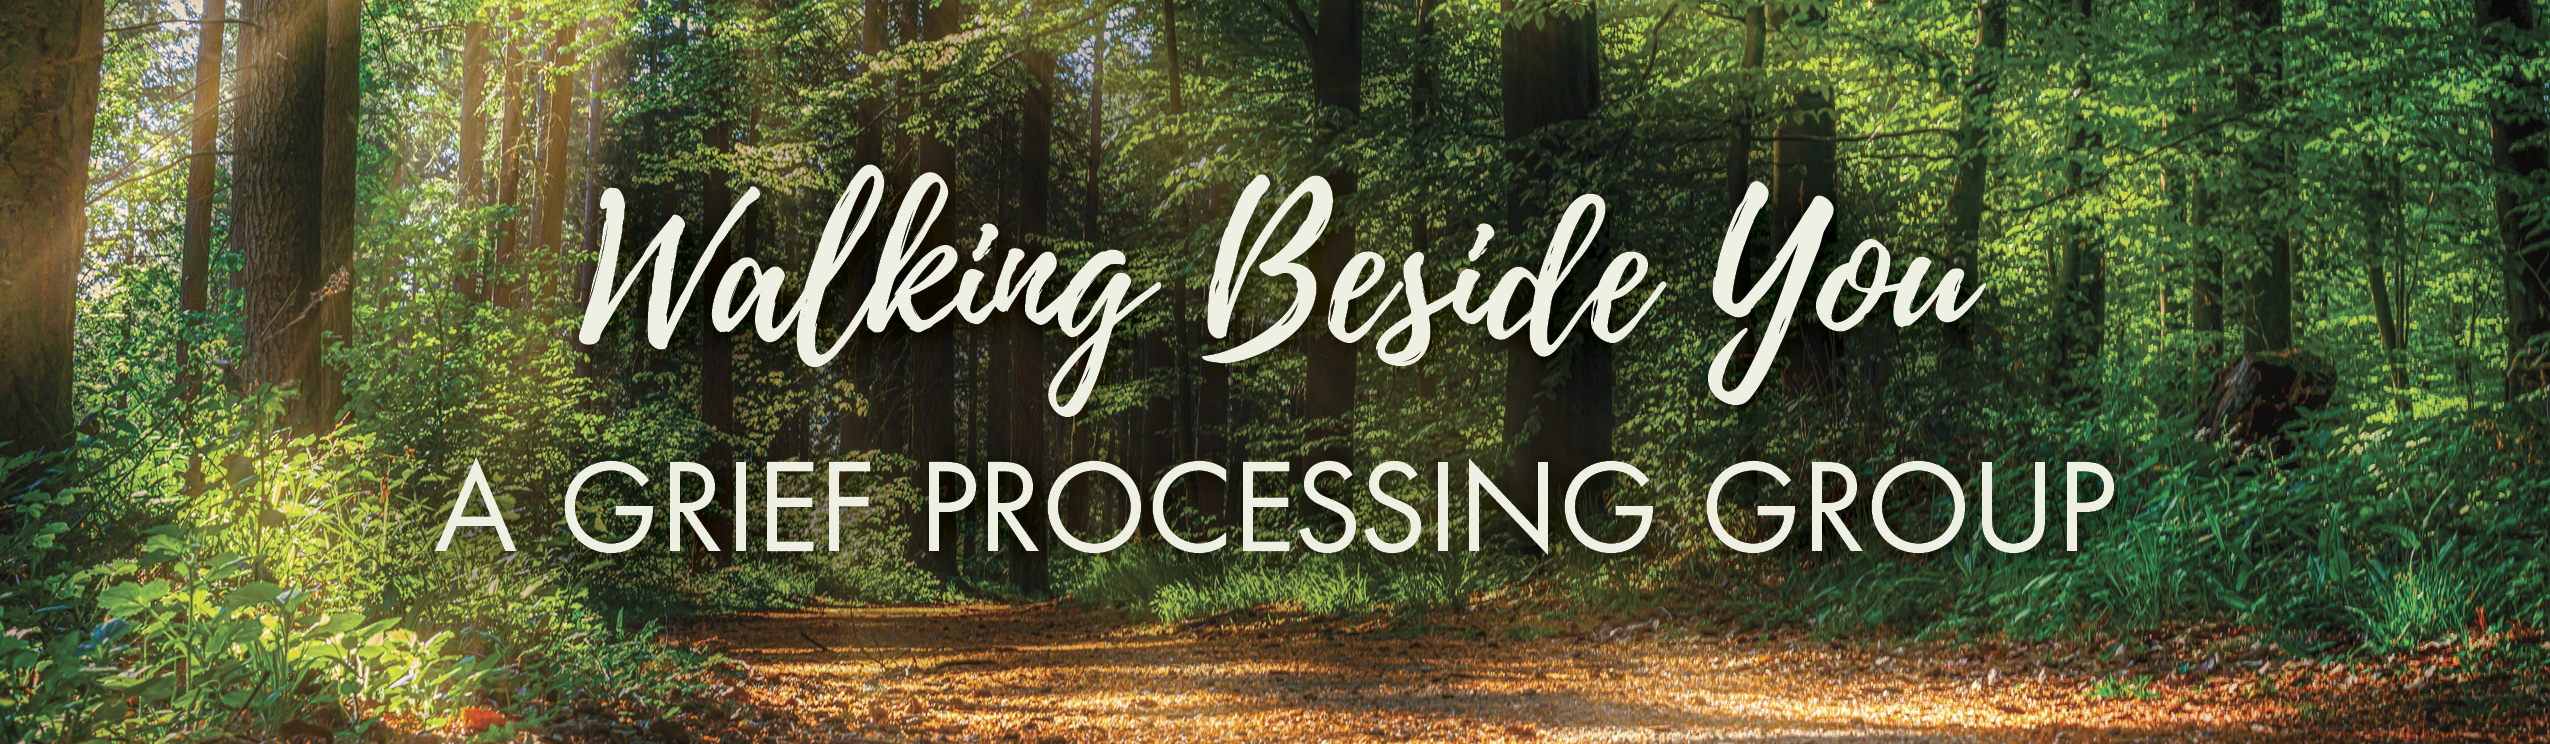 Walking Beside You: A Grief Processing Group